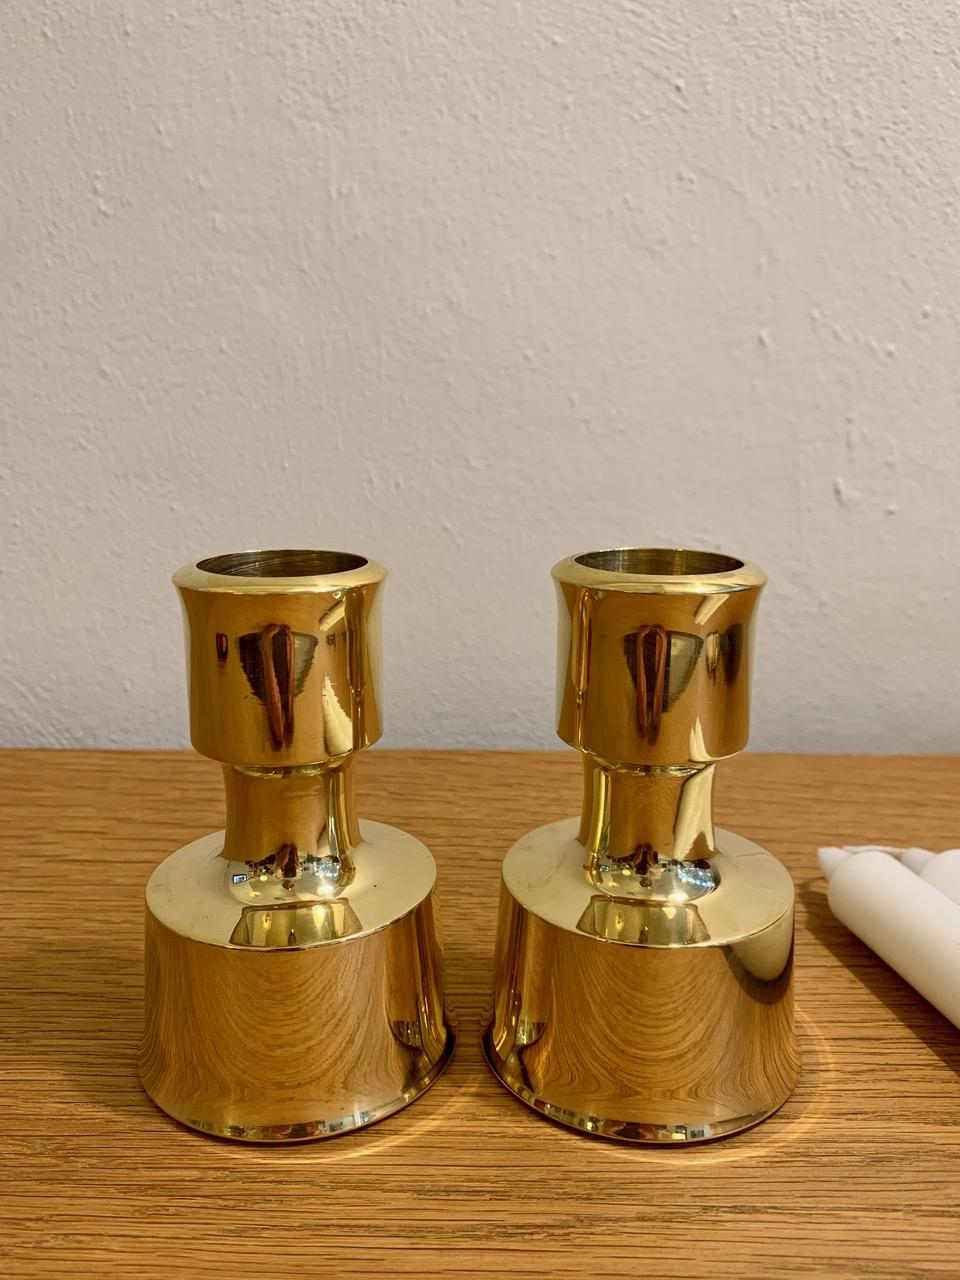 Scandinavian Modern Pair of Solid Brass Candle Holders by Jens H. Quistgaard for Dansk Designs 1963